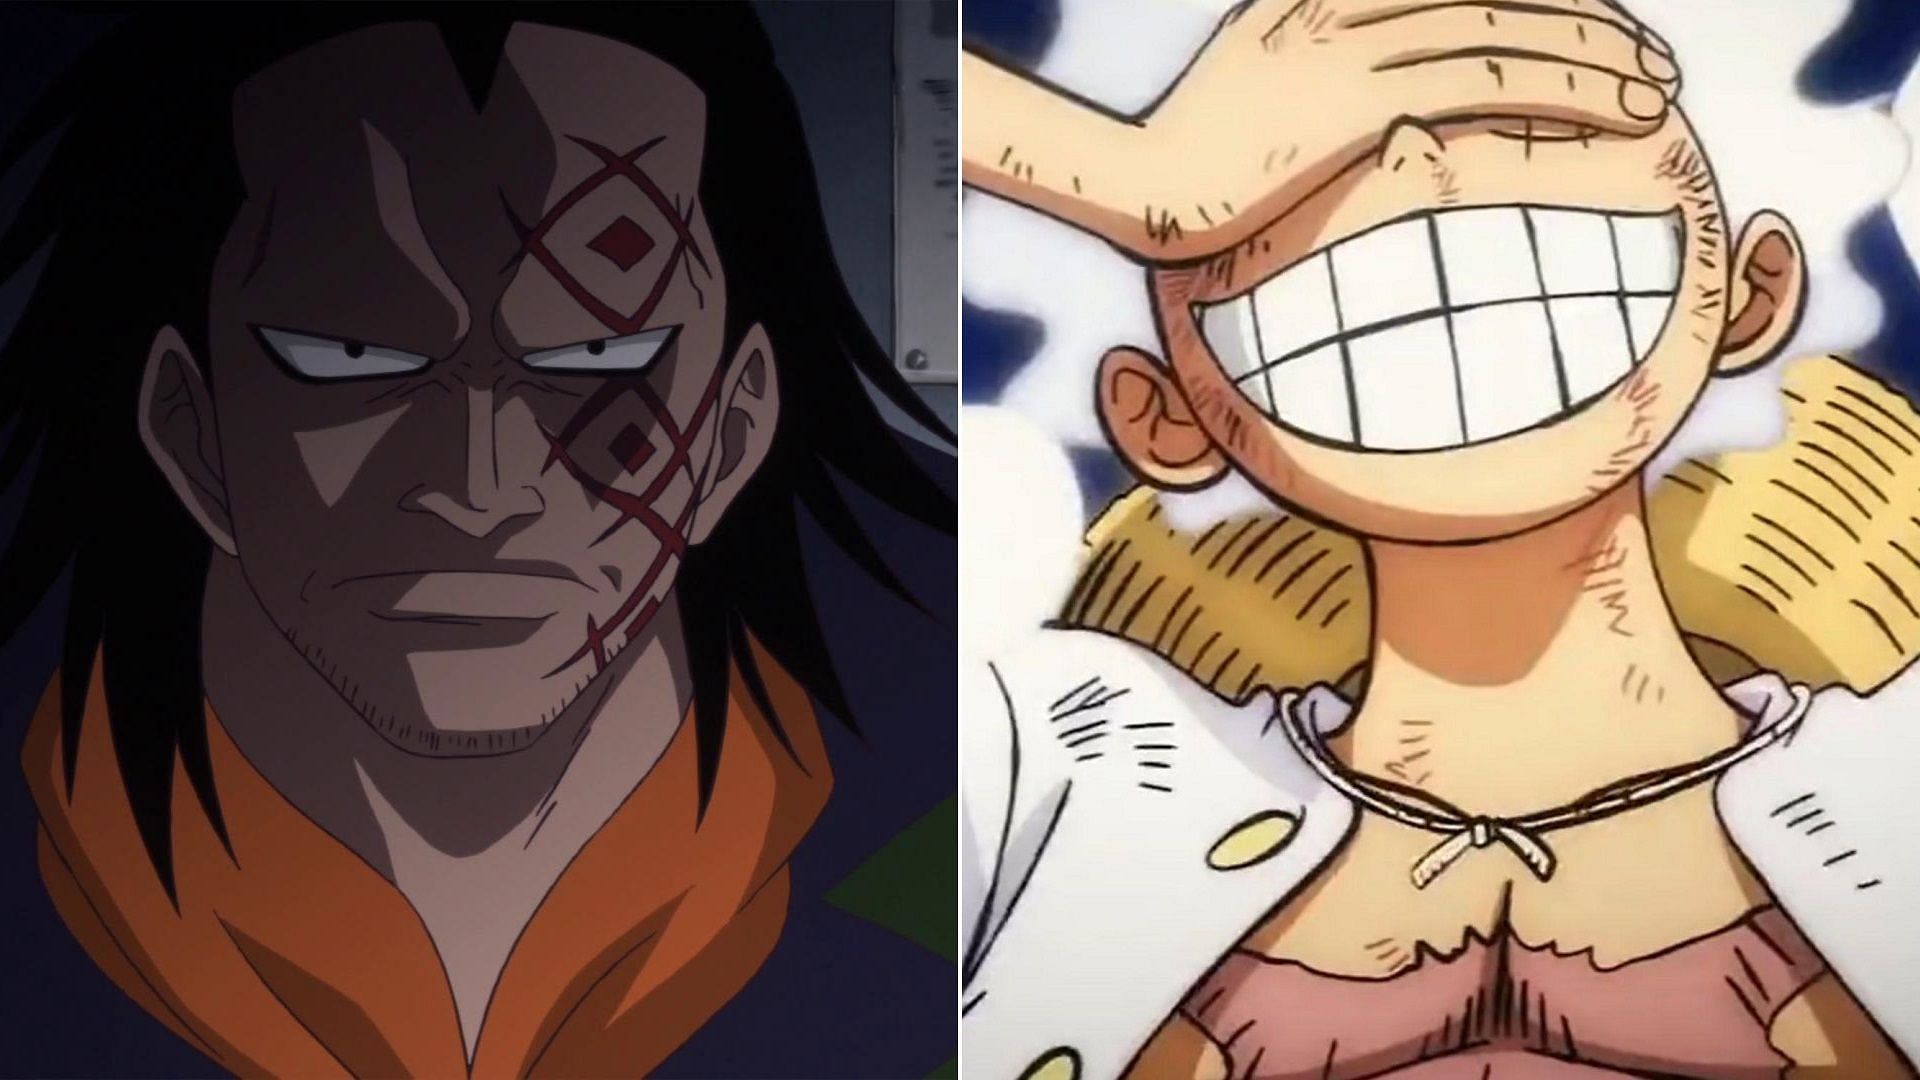 Dragon and Luffy as seen in the One Piece anime (Image via Toei Animation)